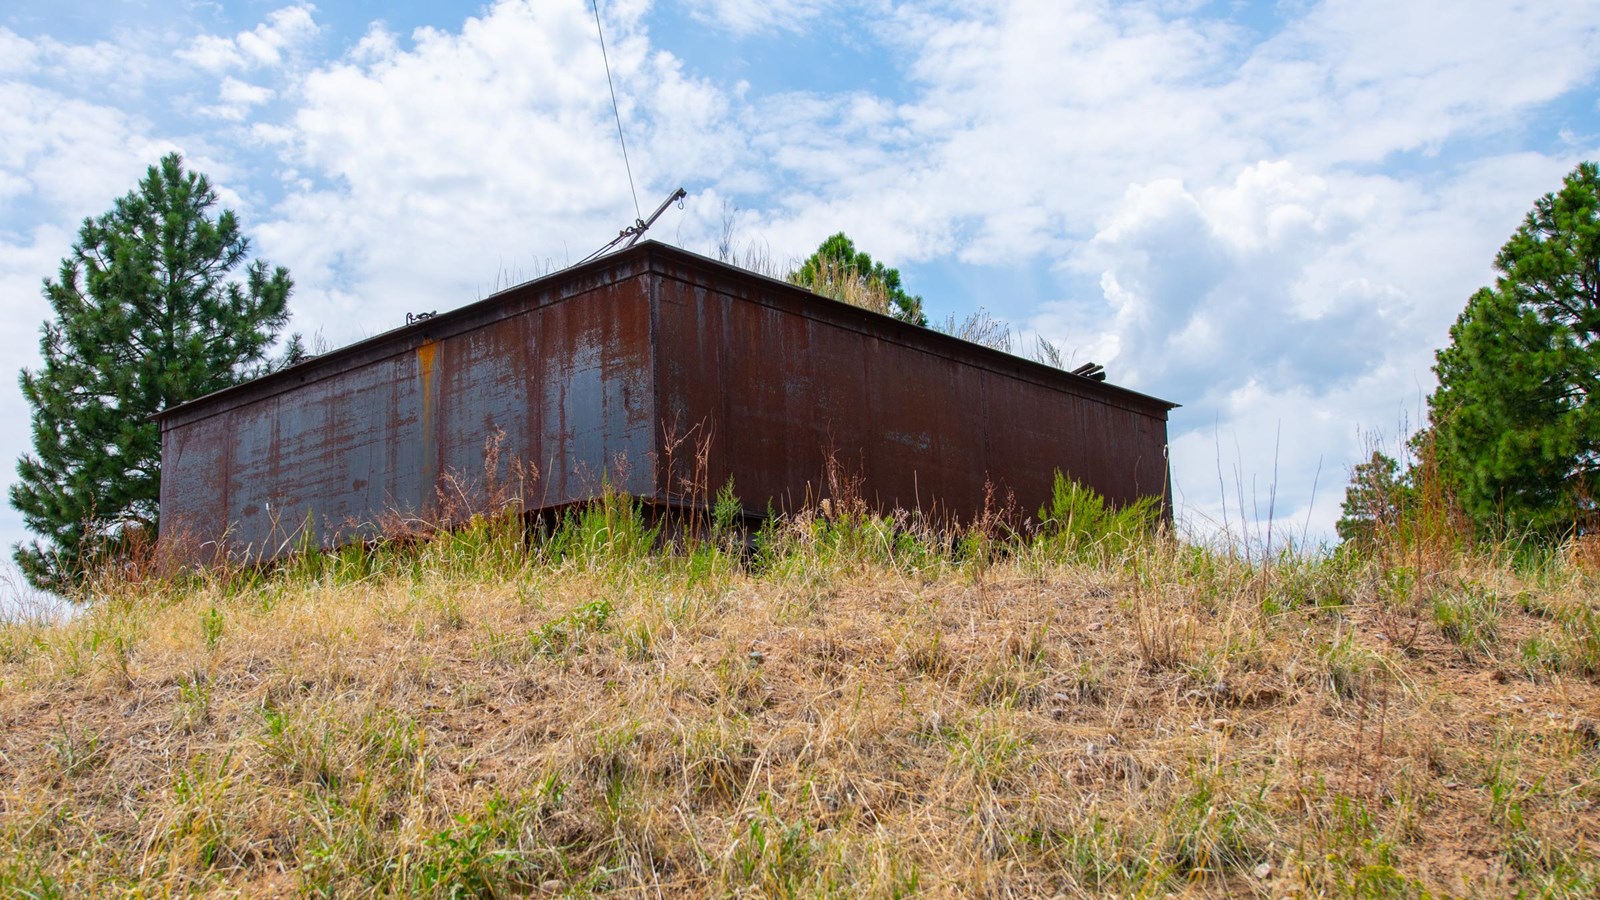 A rusty structure stands atop a rounded grassy hill.